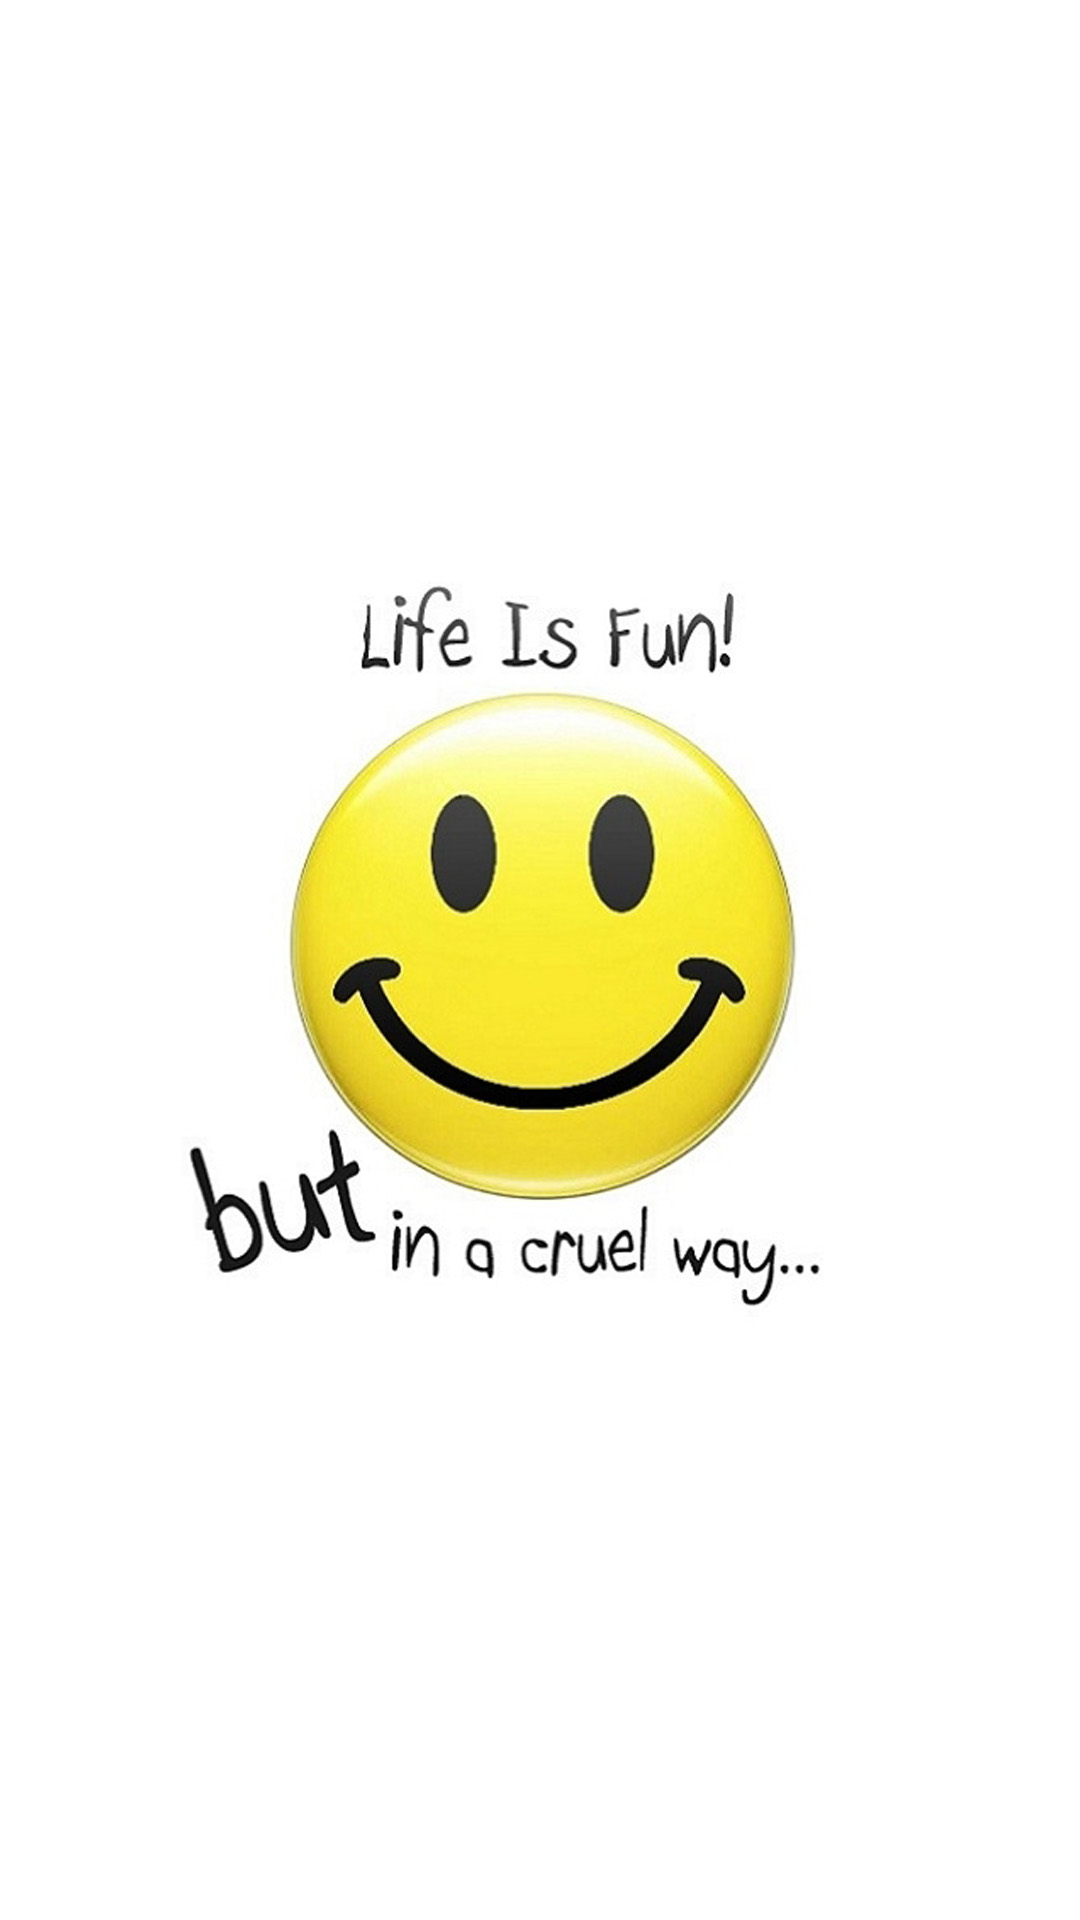 Life is fun Android wallpaper